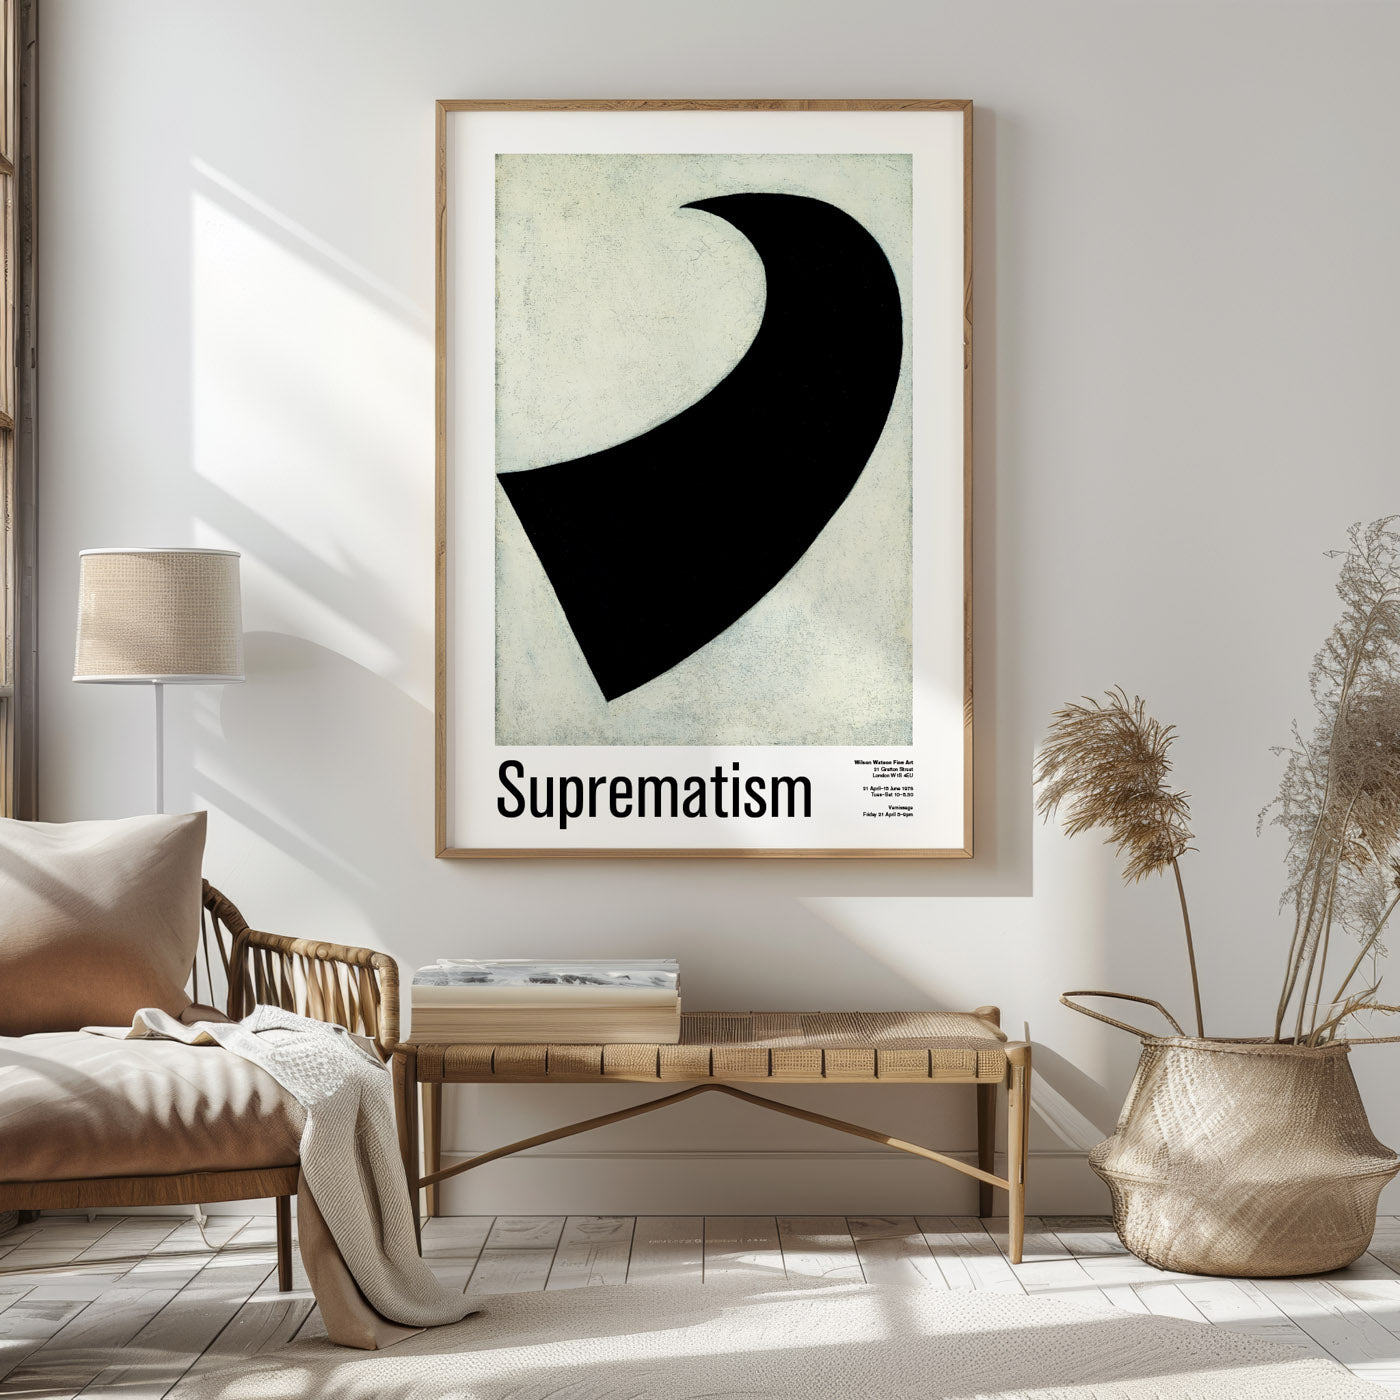 Suprematism Exhibition Poster, 1917 Malevich Painting Print